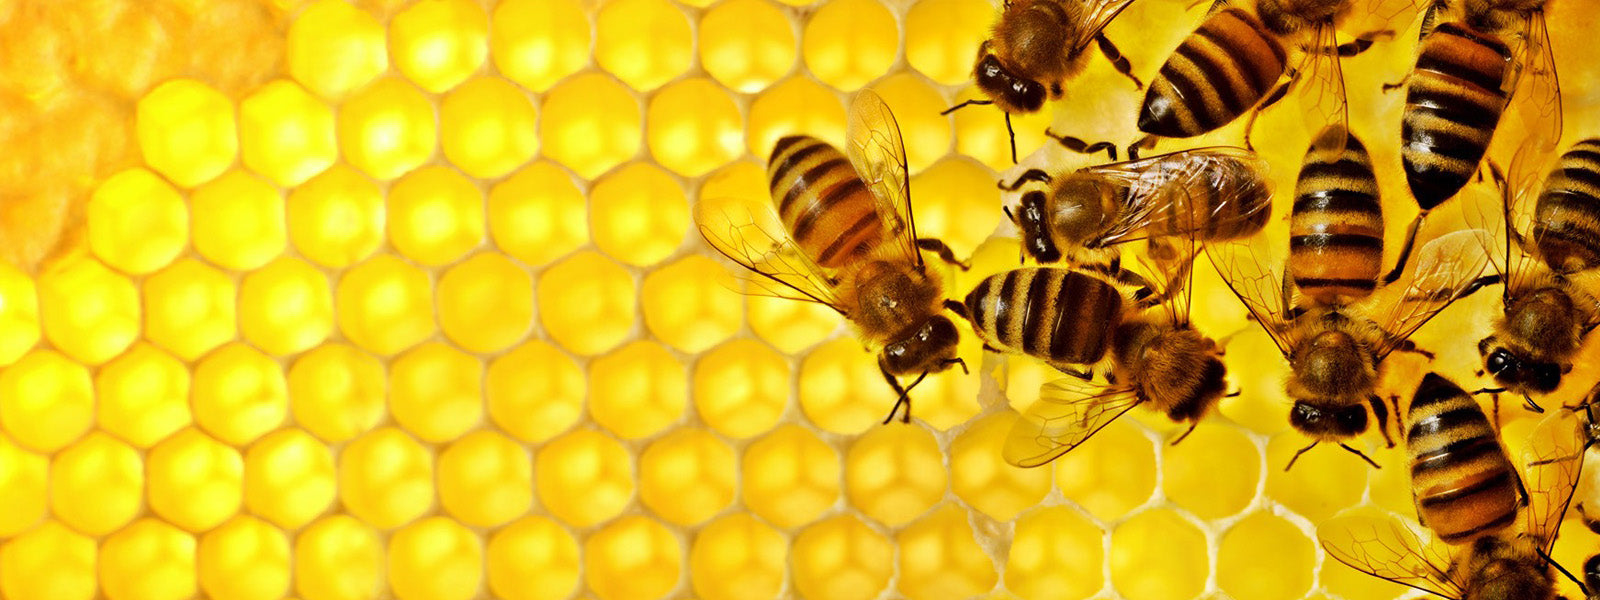 worker bees cleaning cells of comb